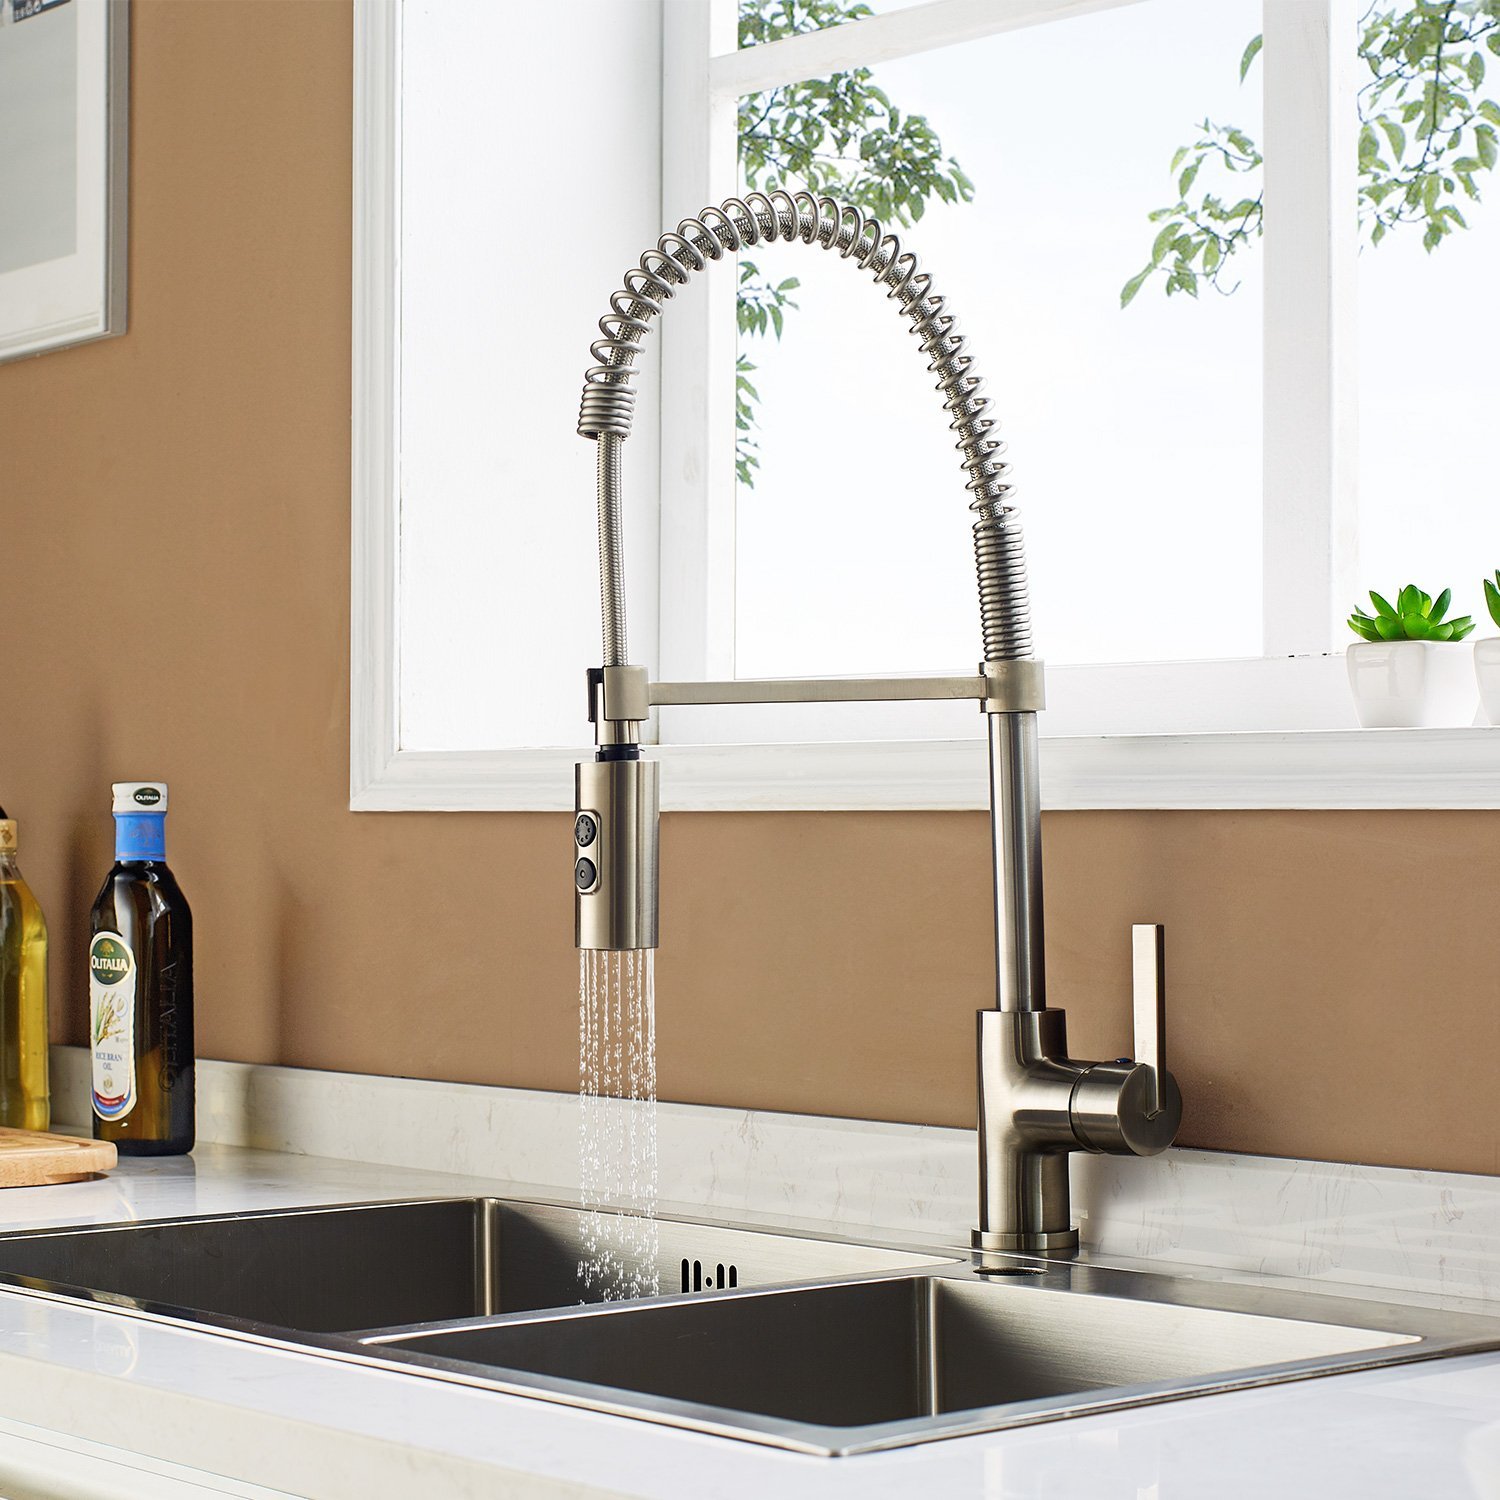 Chieti Kitchen Faucet With Pull-Down Sprayer